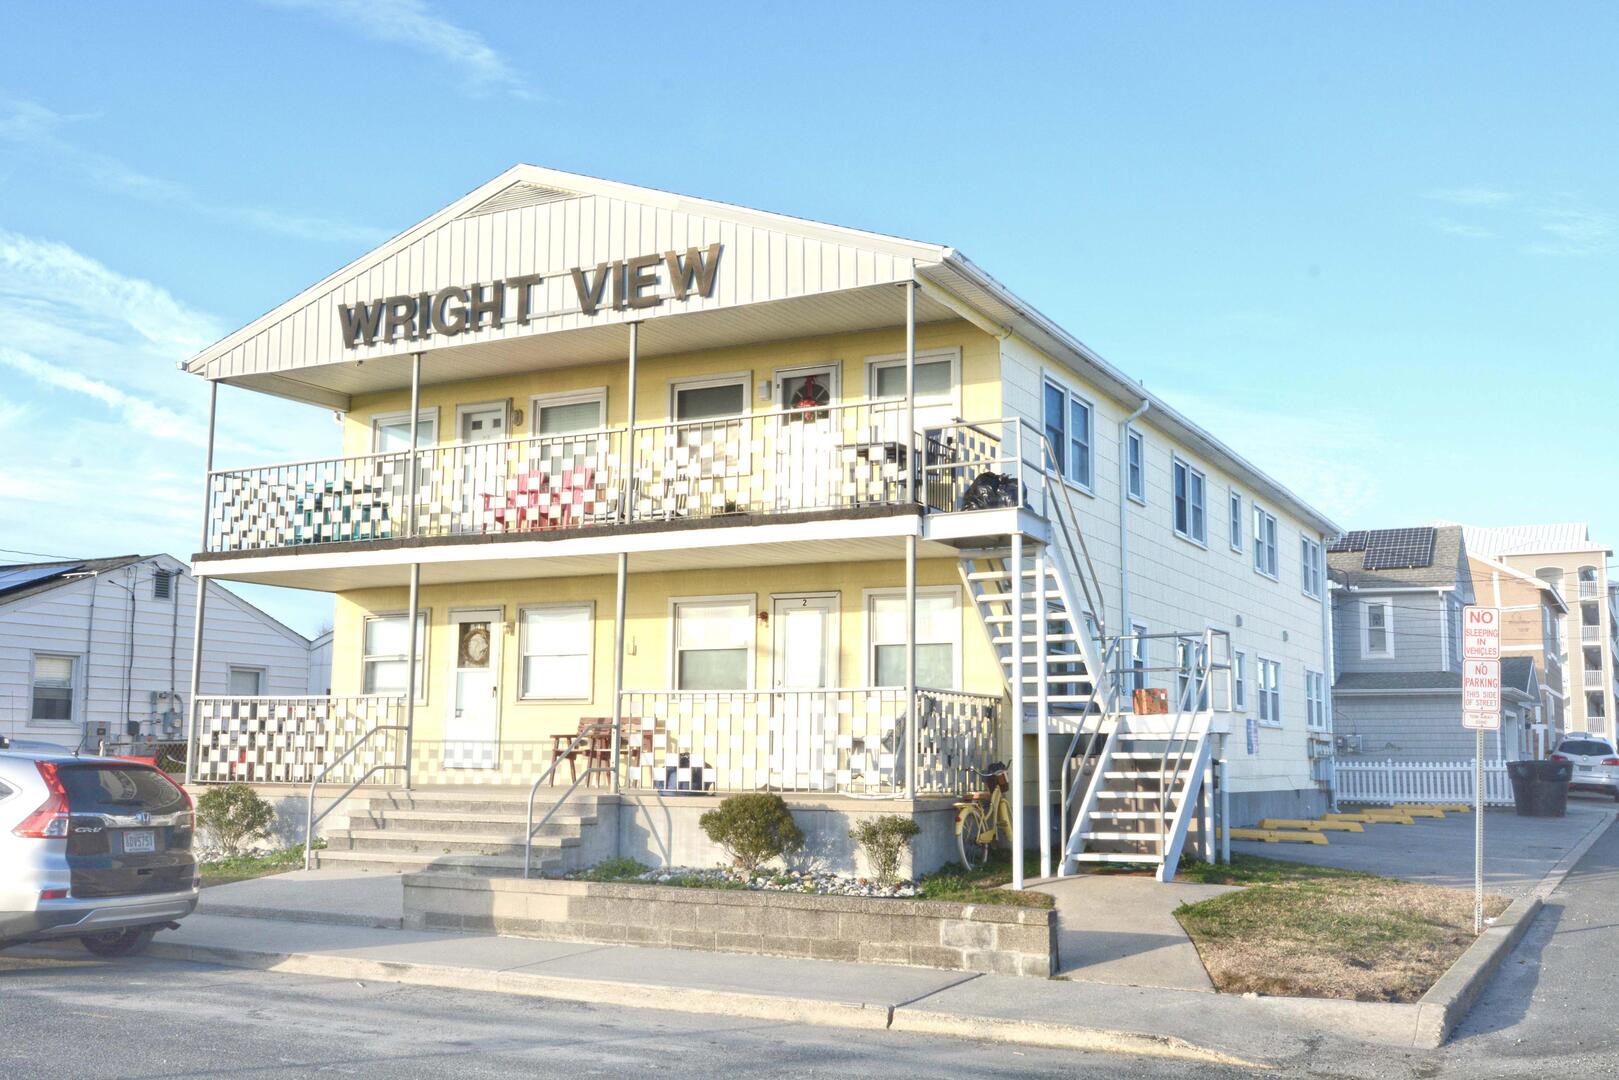 Wright View